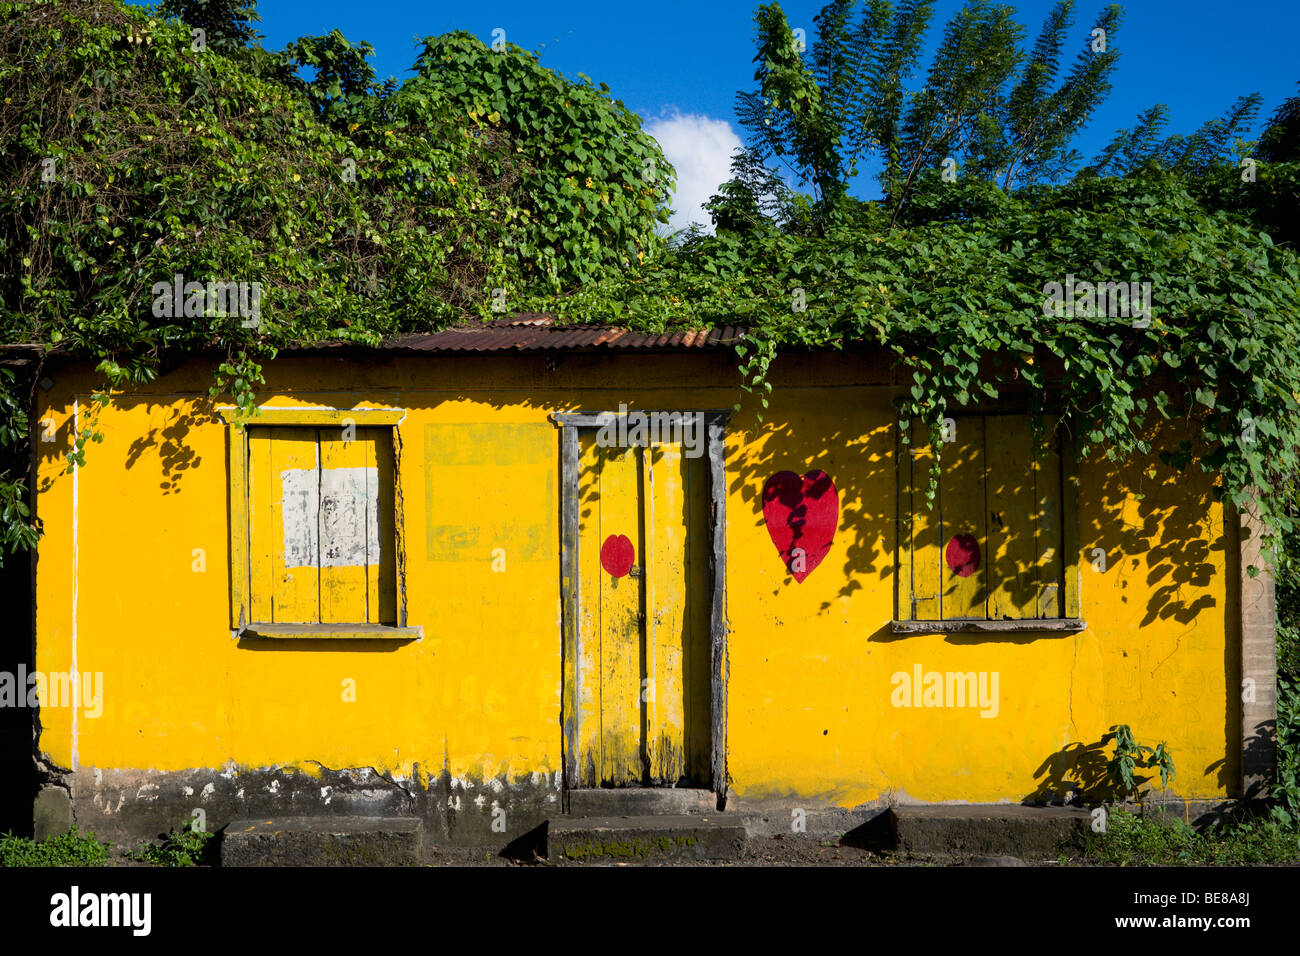 WEST INDIES Caribbean Grenadines Grenada St John Parish Yellow small house with red heart symbol of ruling NDC political party Stock Photo